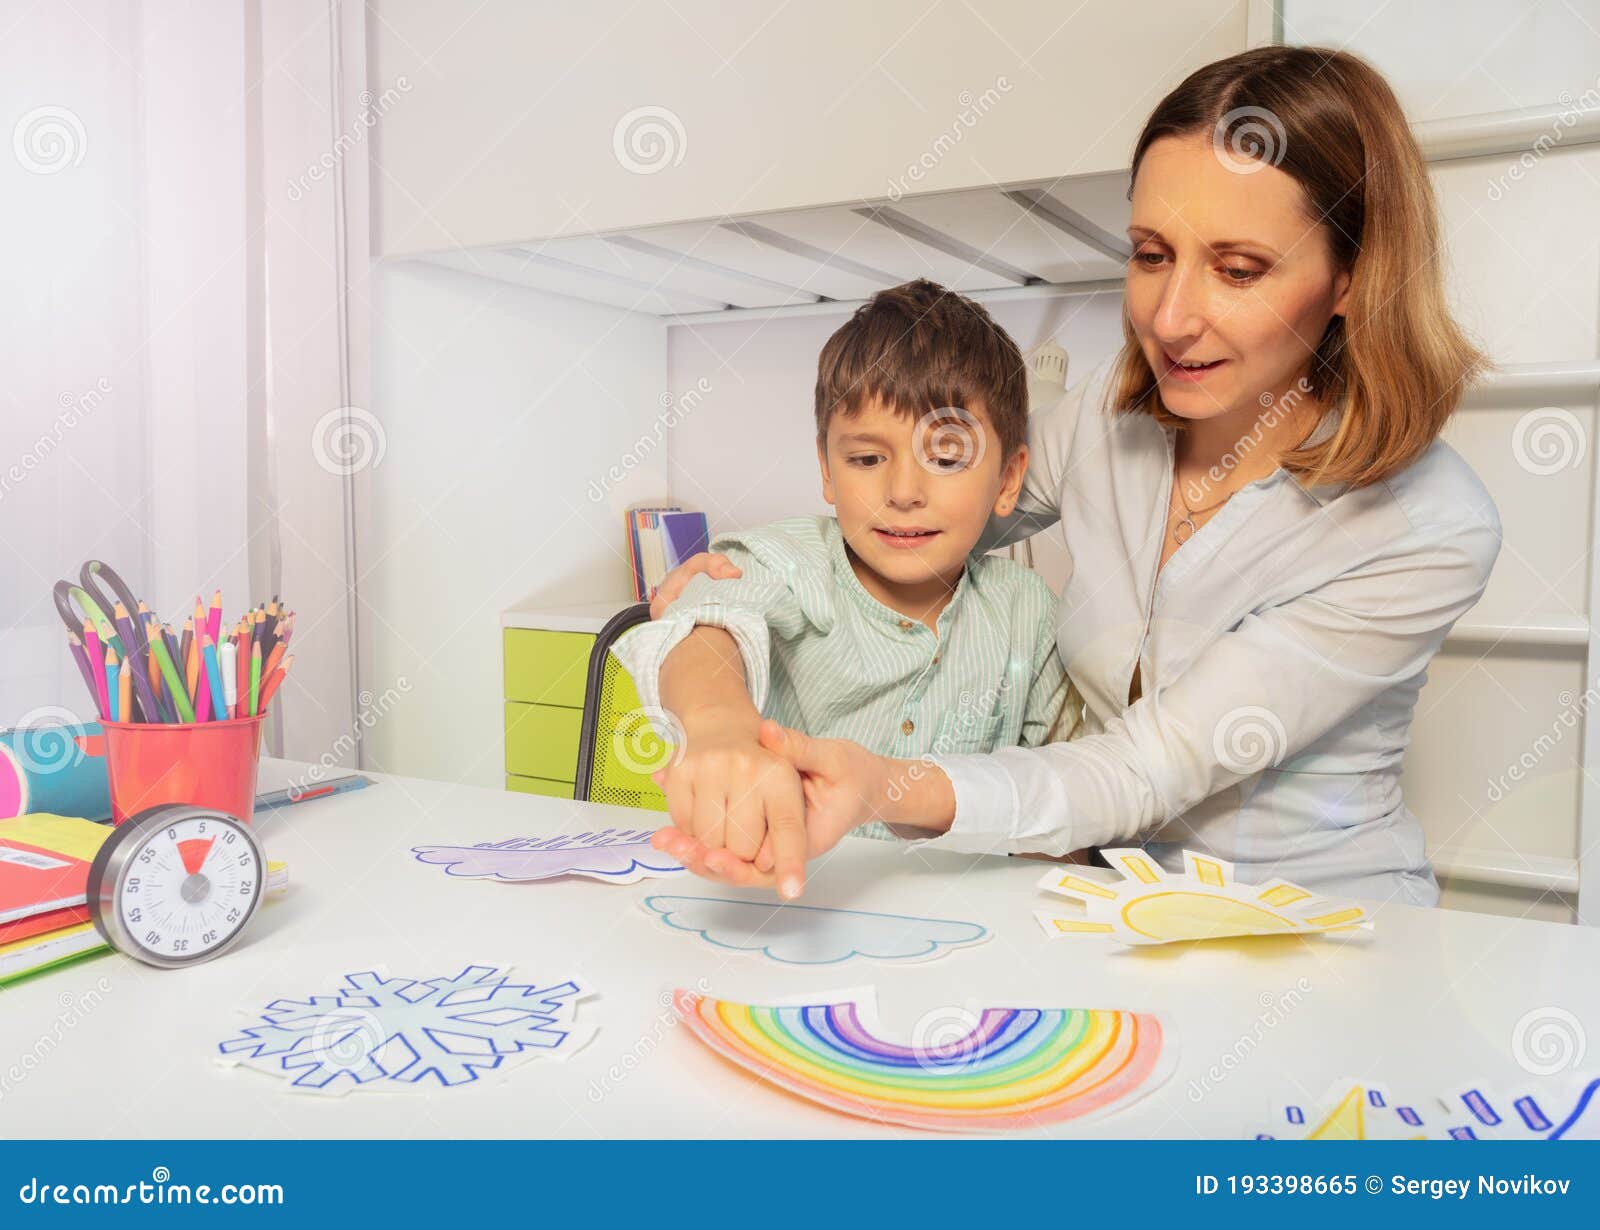 woman during aba therapy teach boy weather cards